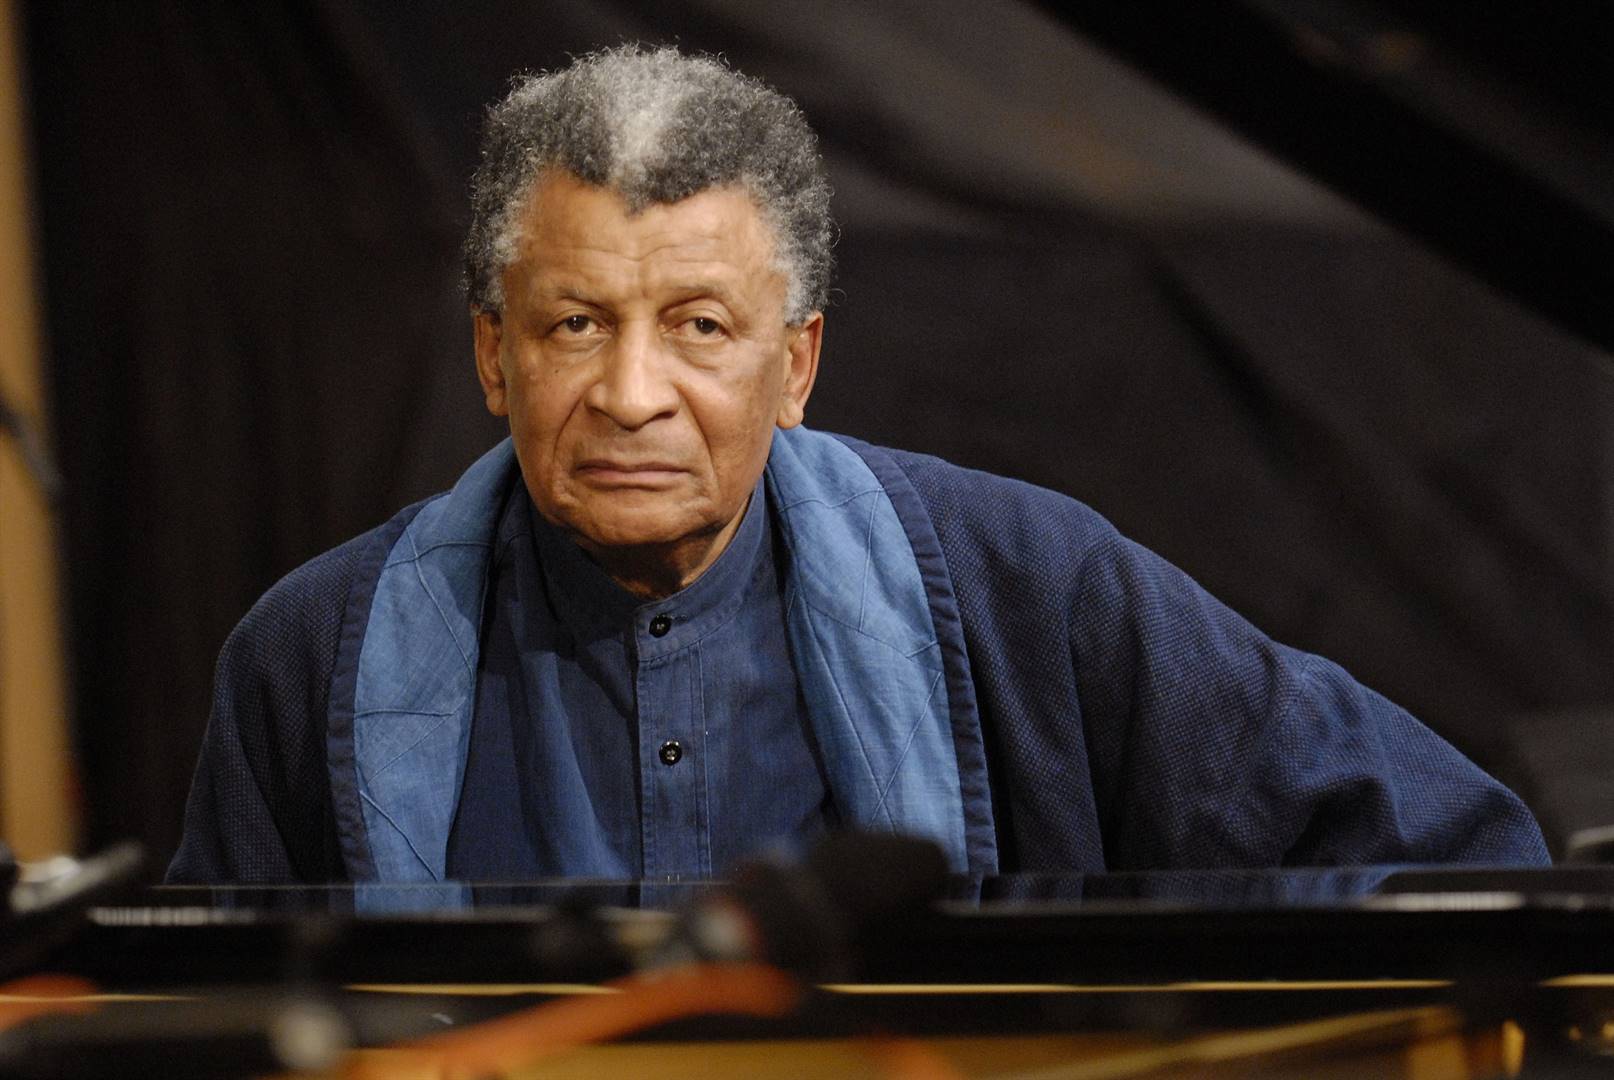 Abdullah Ibrahim is excited to be returning to South Africa. Photo by Die Burger